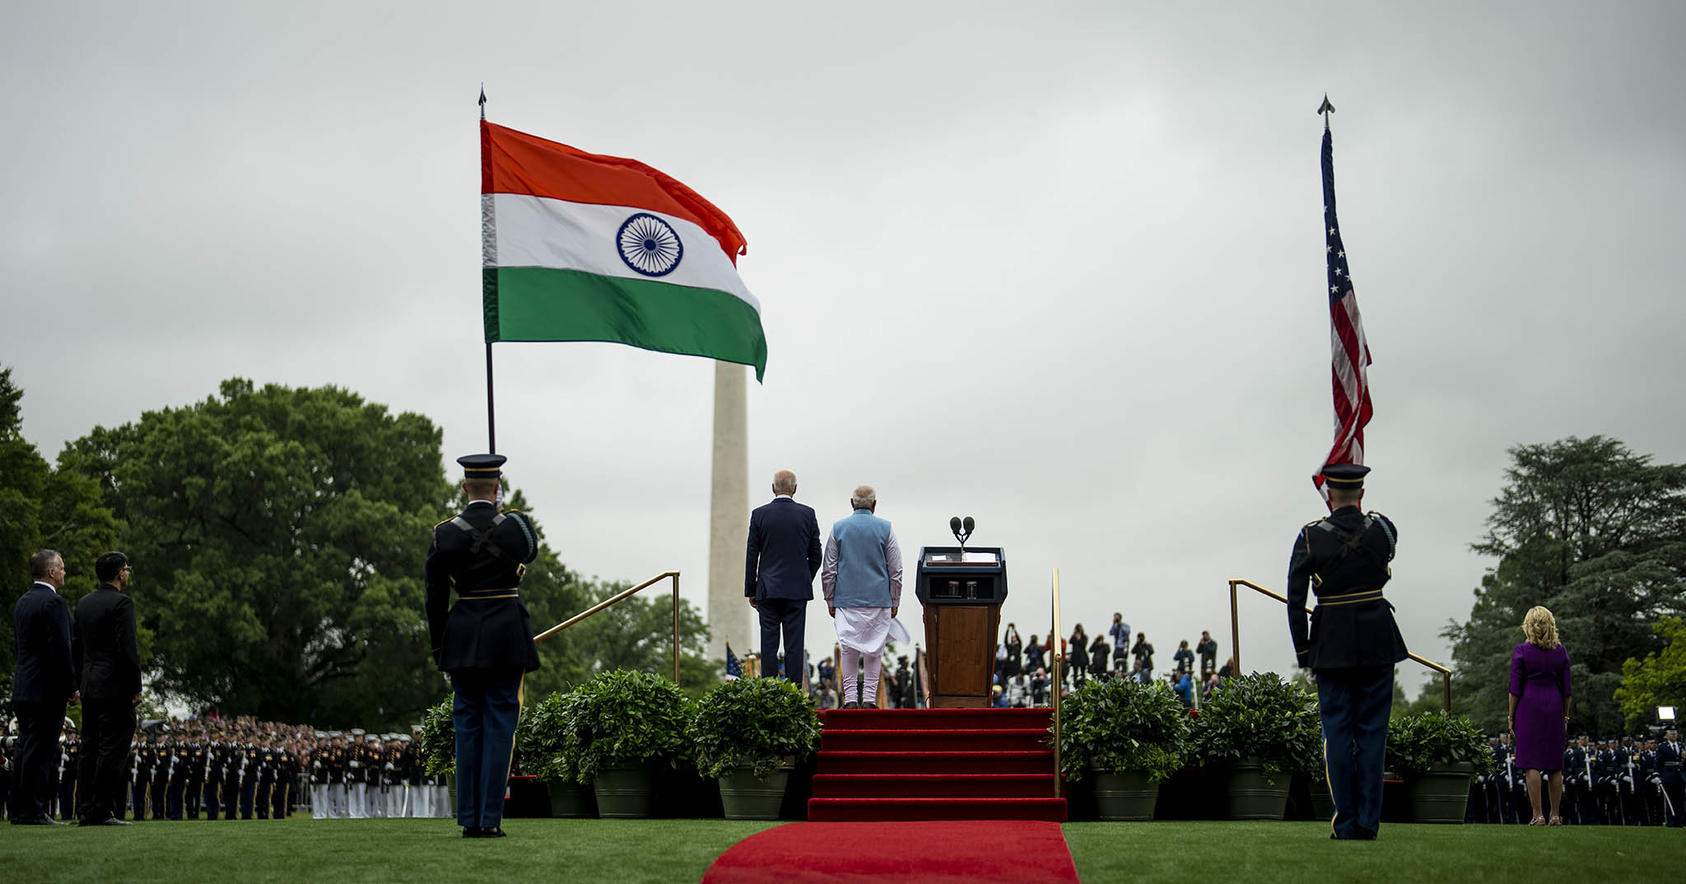 Soldiers hold Indian and American flags as President Joe Biden and Indian Prime Minister Narendra Modi of India take part in a State Arrival Ceremony on the South Lawn of the White House in Washington, June 22, 2023. (Doug Mills/The New York Times)